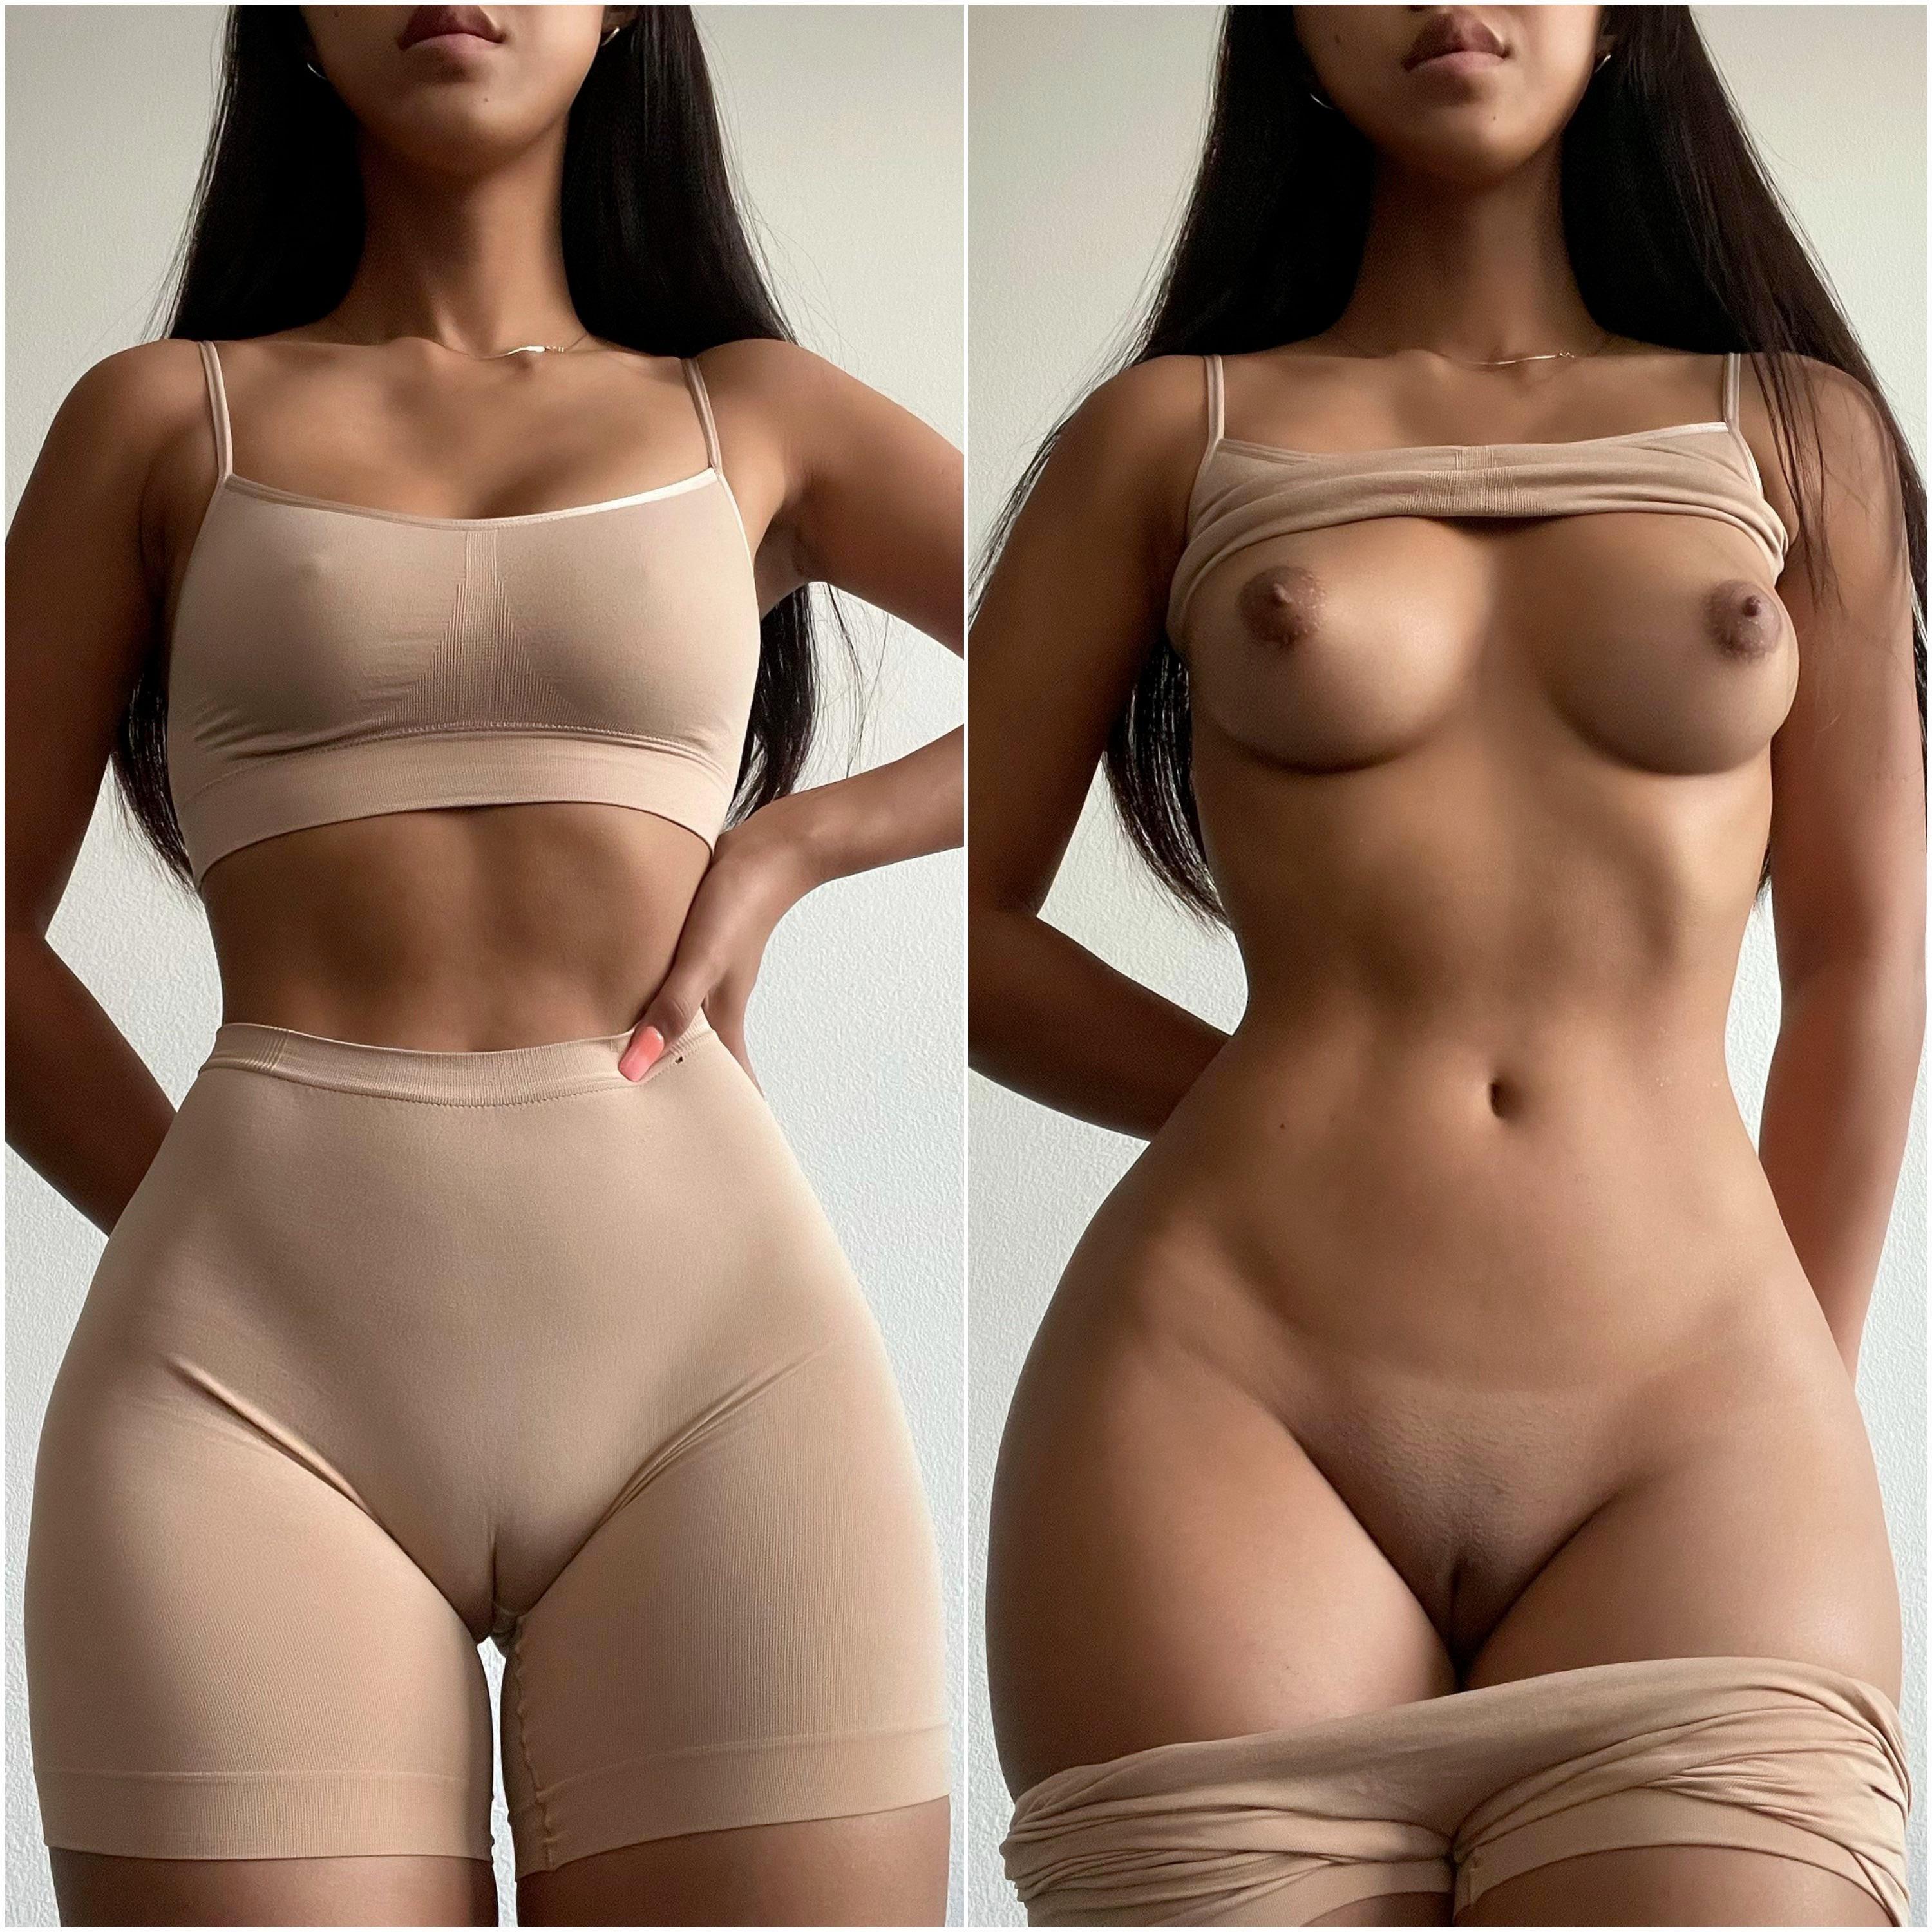 Hot Asian Nude Camel Toe - I can't hide my camel toe when I wear my workout outfit